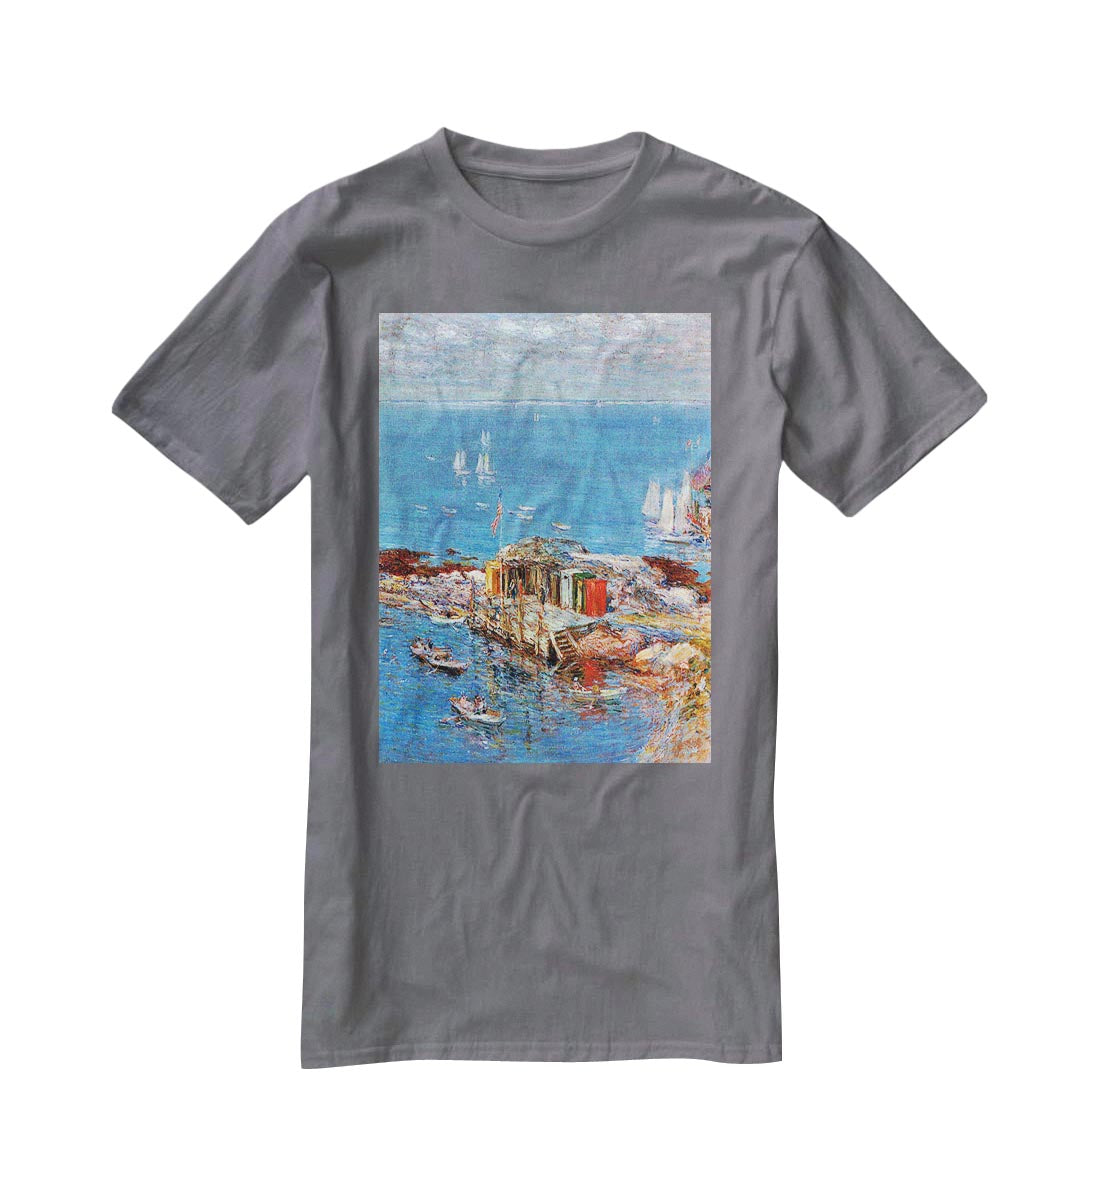 Afternoon in August Appledore by Hassam T-Shirt - Canvas Art Rocks - 3